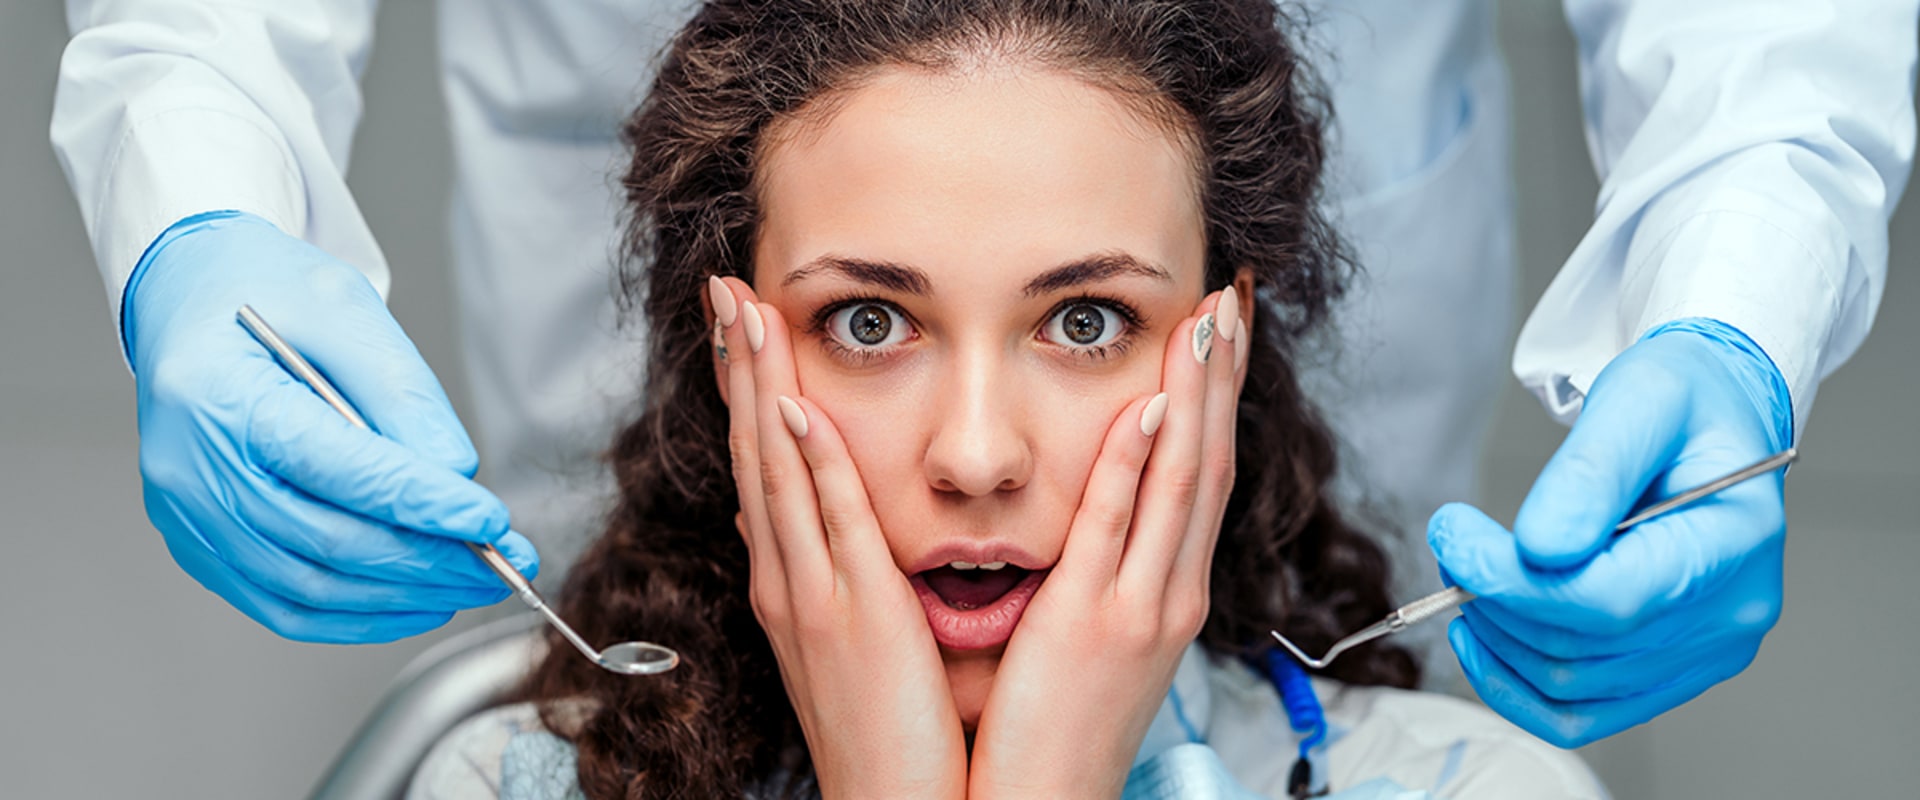 Avoiding Dental Appointments: Understanding the Fear and How to Overcome It